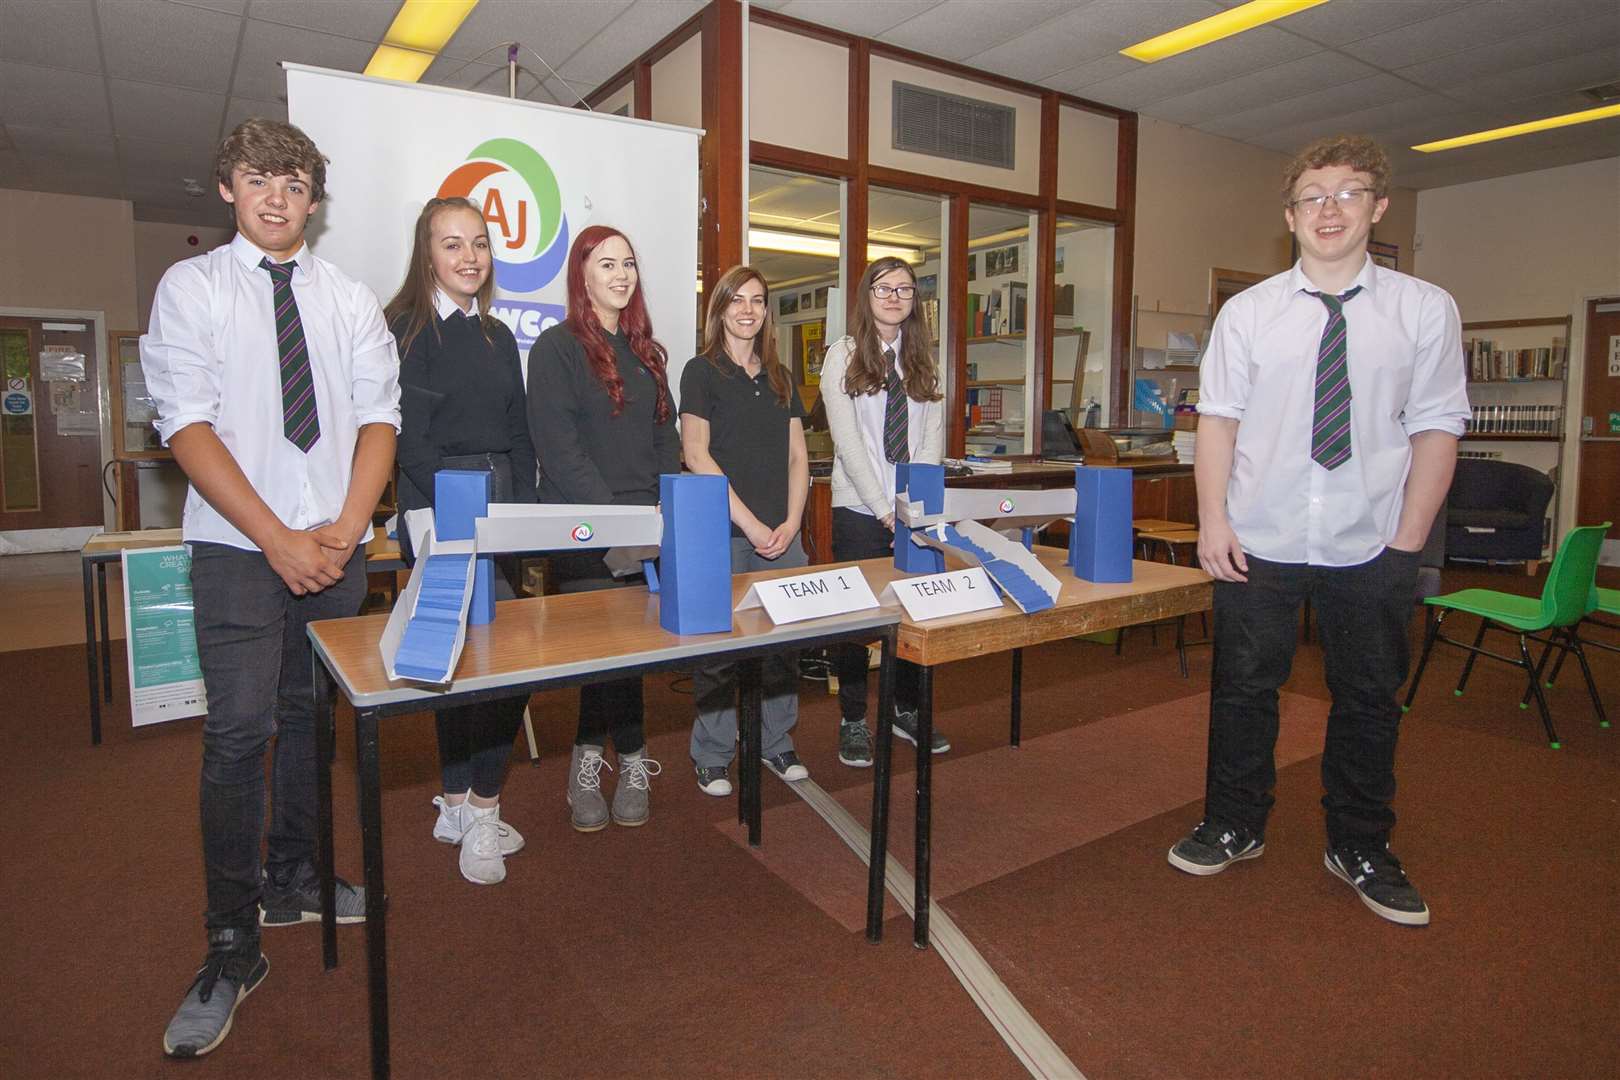 Secondary school teacher sponsor, AJ Engineering, regularly supports school activities. A previous project saw the company work with Forres Academy pupils. Pictured (centre) are former graduate apprentice Laura Mair and quality manager Jazmin Kellas.